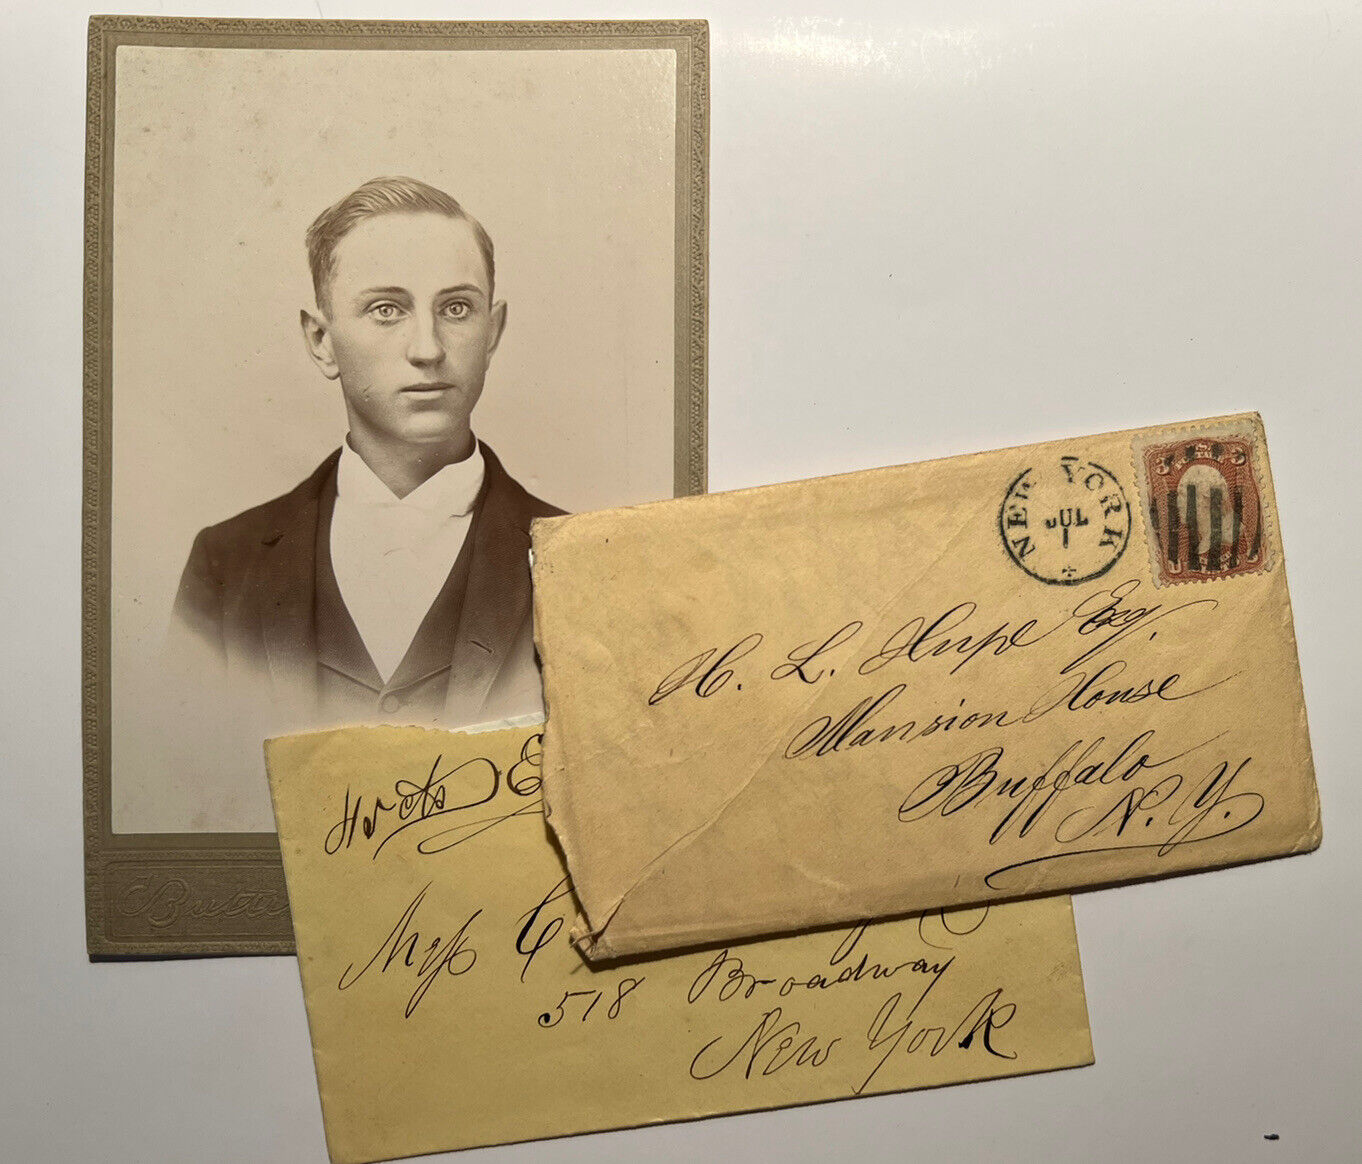 1867 HAND-WRITTEN LETTERS from New York and authors photograph 156 yrs old